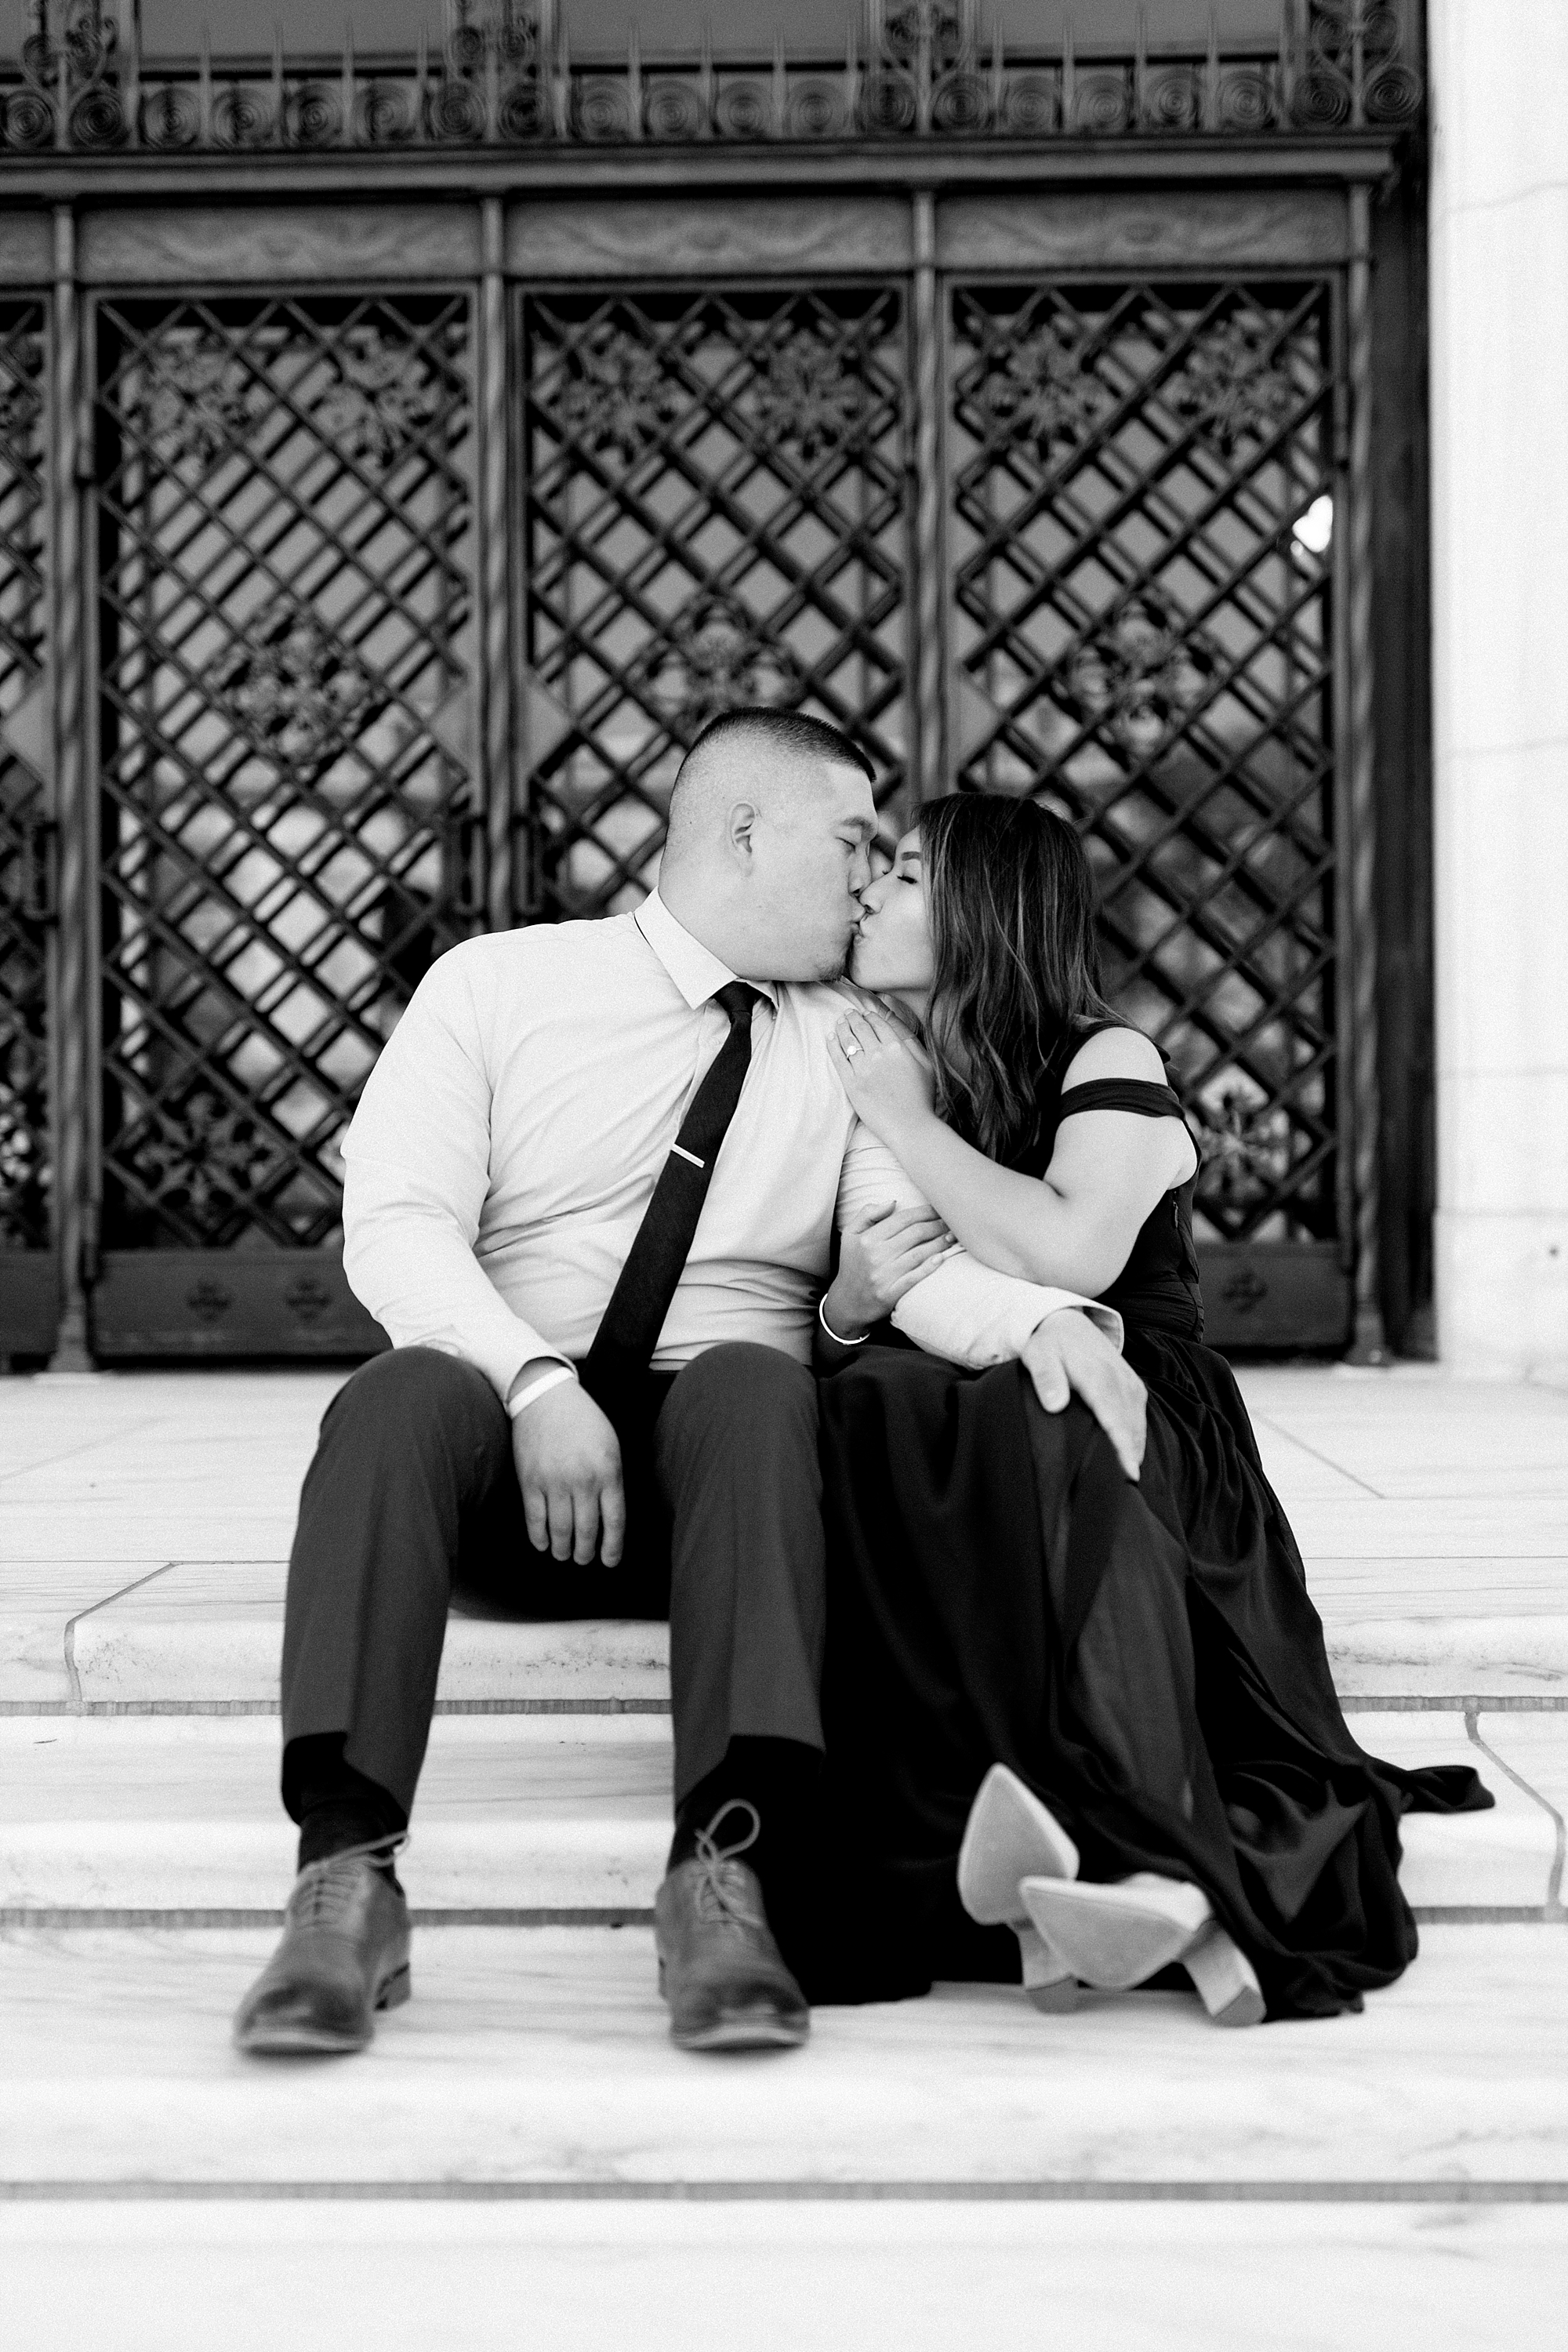 A fun and elegant sunrise engagement at the Detroit Institute of Arts in Downtown Detroit, Michigan by Breanne Rochelle Photography.